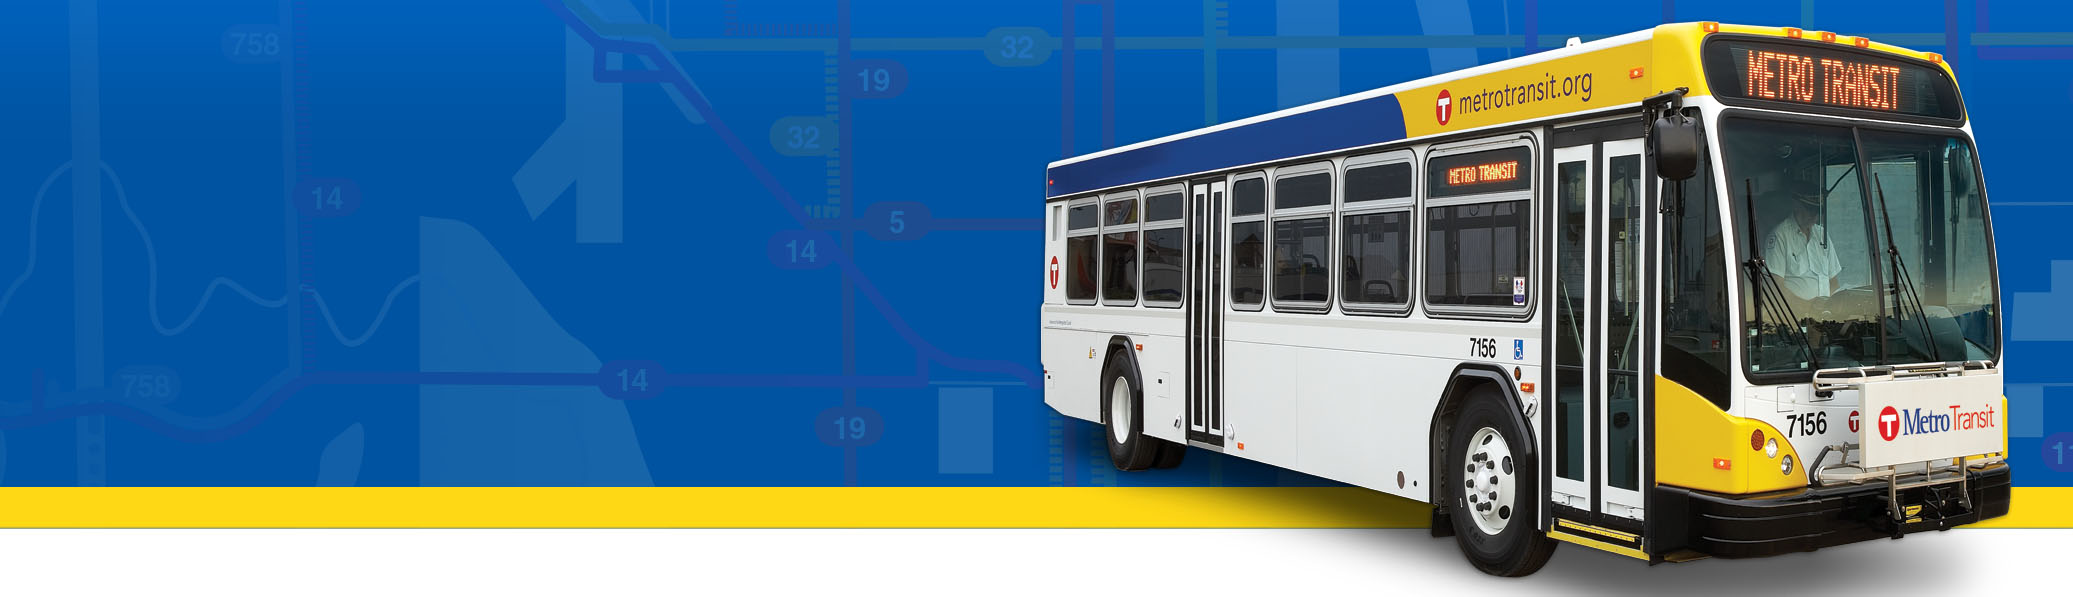 Help shape the future of Metro Transit bus service. We're setting priorities for our growing transit system.